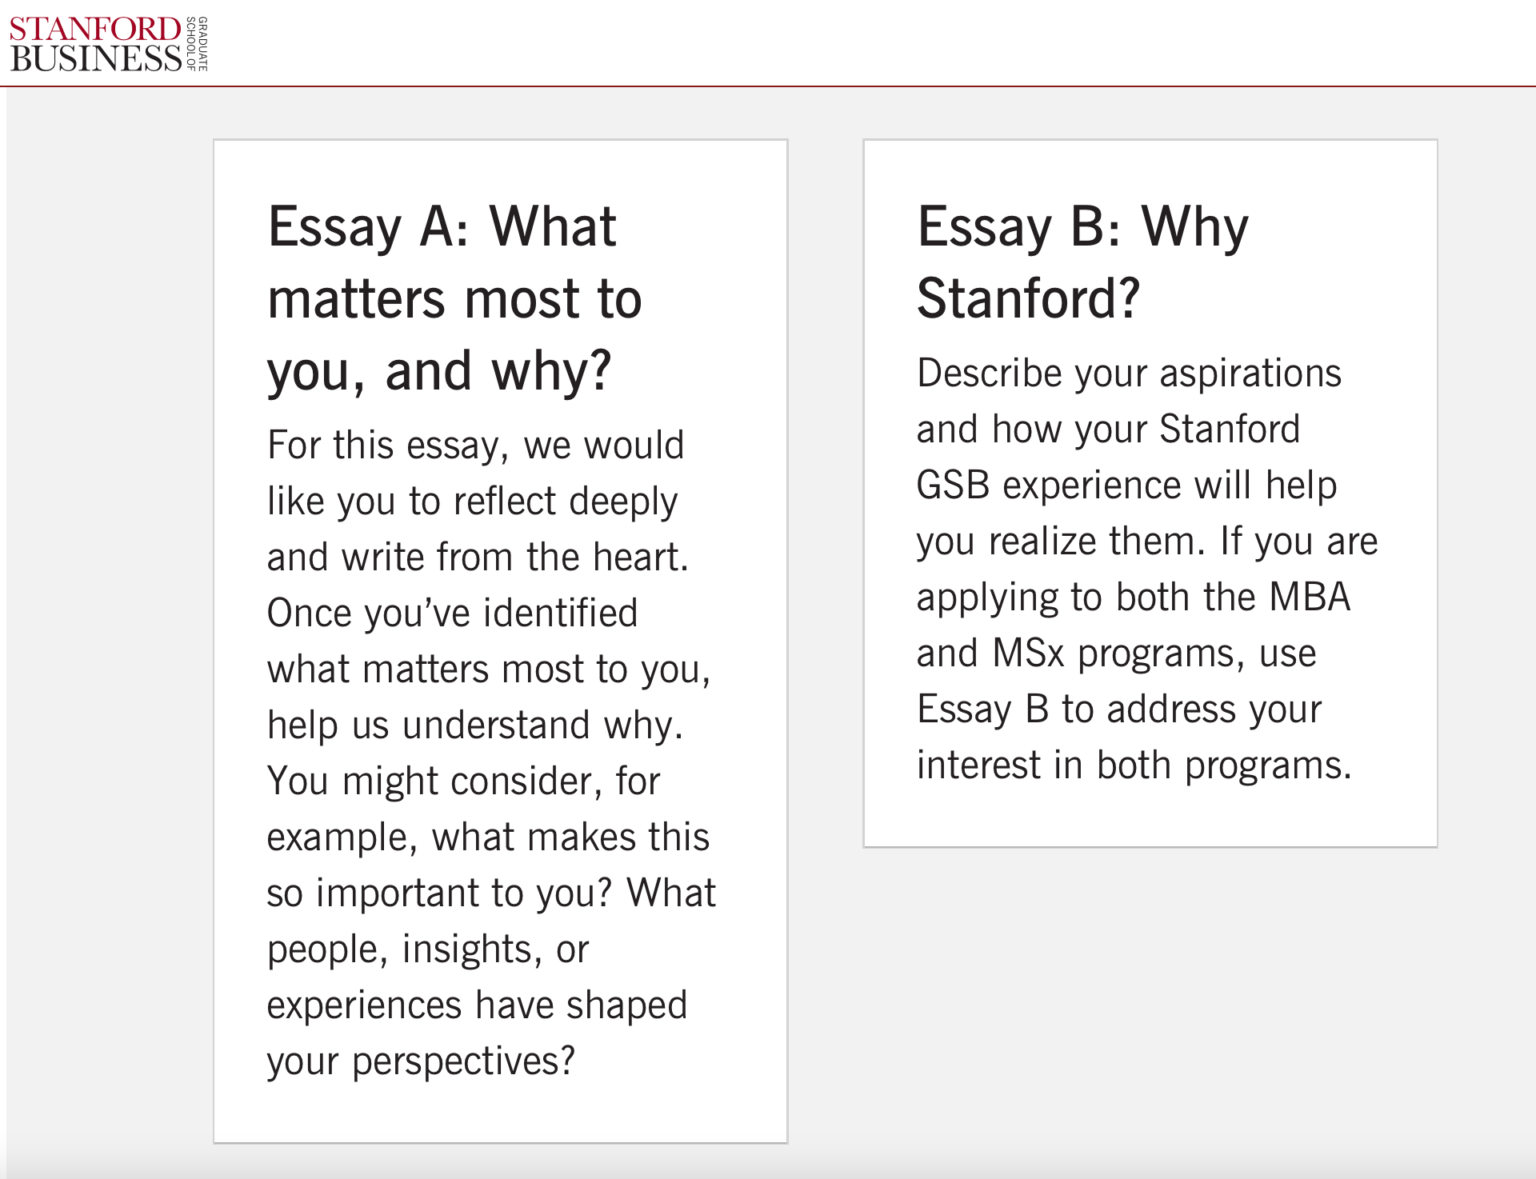 stanford gsb essay examples